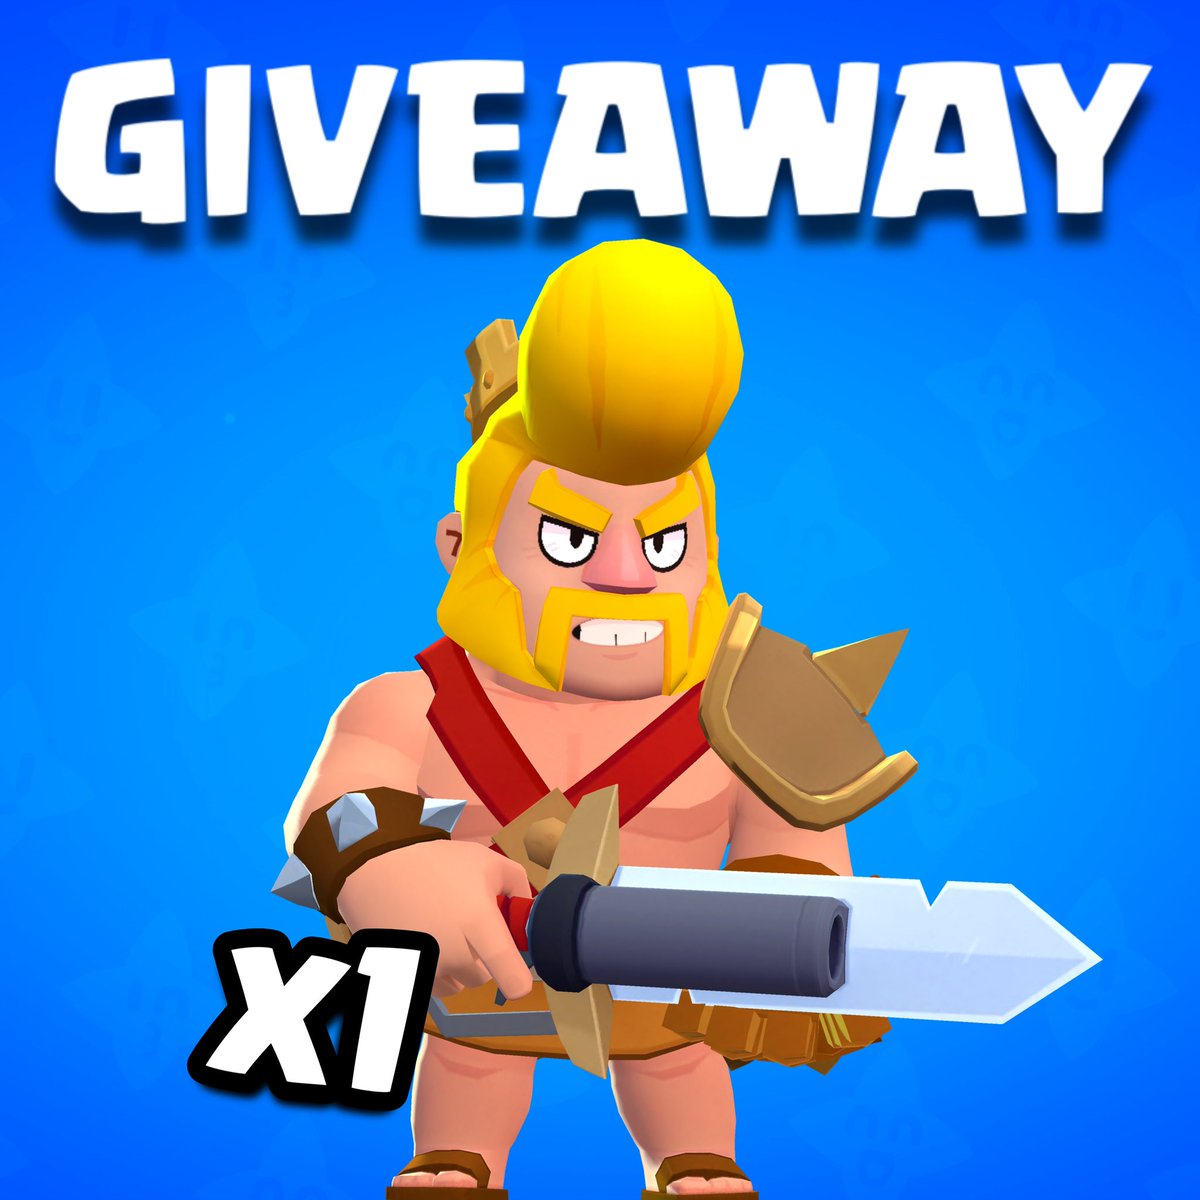 Barbarian King Bull Skin Giveaway👀
To participate you must:
■Follow @TheRealBertz 
●❤️&♻️ this post
■Comment your Favourite Brawler😎

Ends: 7 days🕒 

Credits: @TTL_gamers
#BrawlStars #supercellpartner #giftedbysupercell